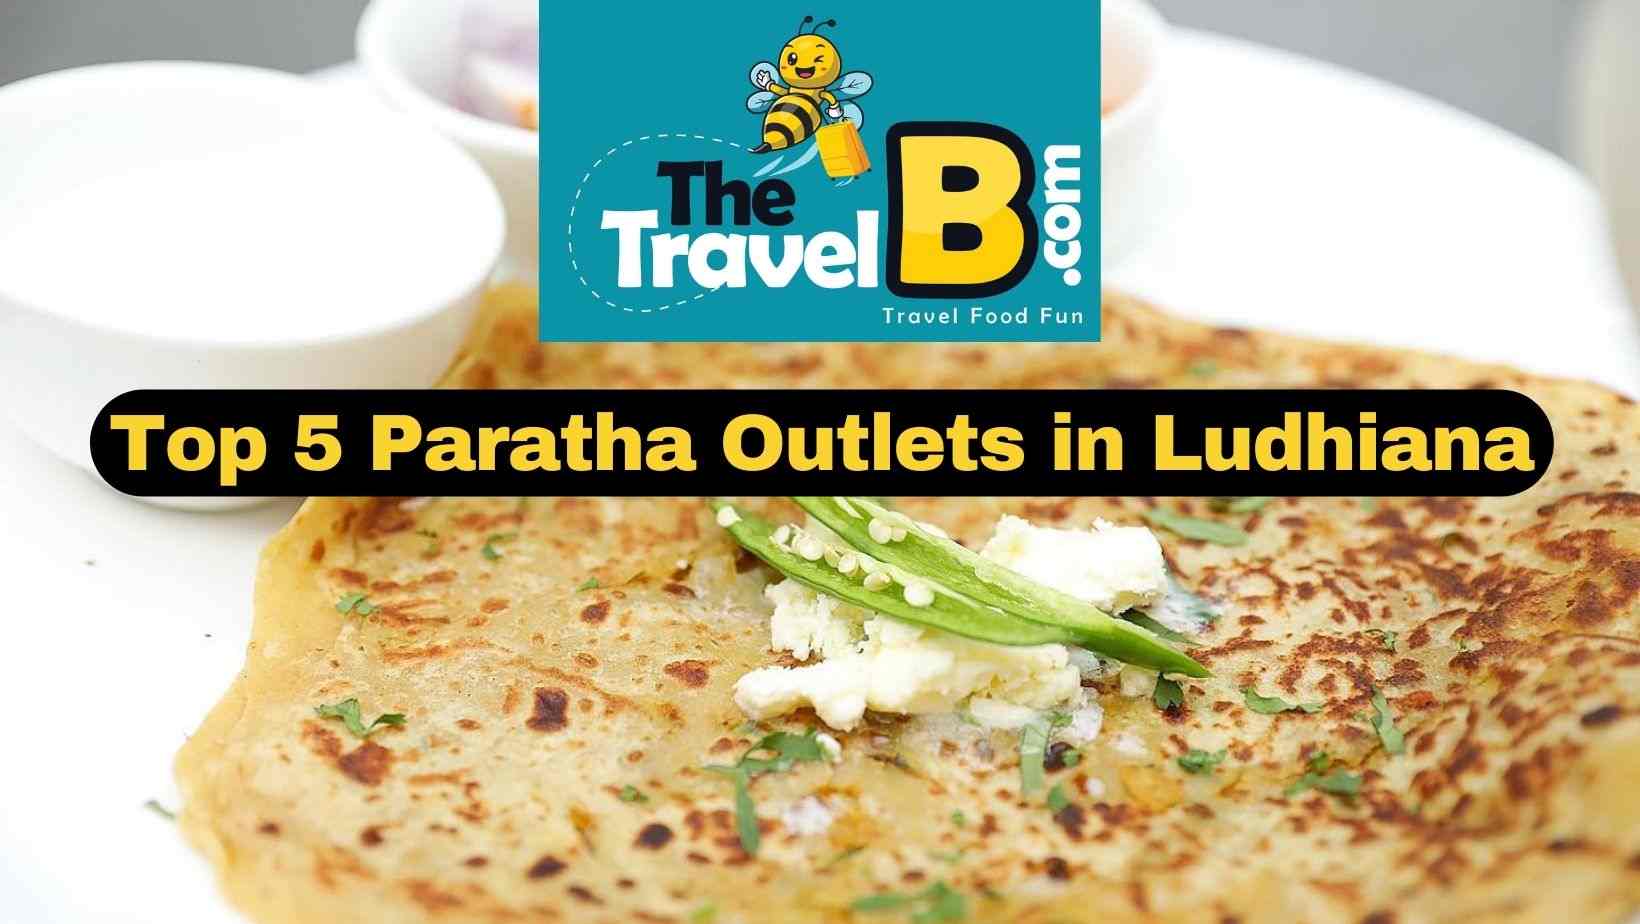 <strong>Top 5 Paratha Outlets in Ludhiana</strong>